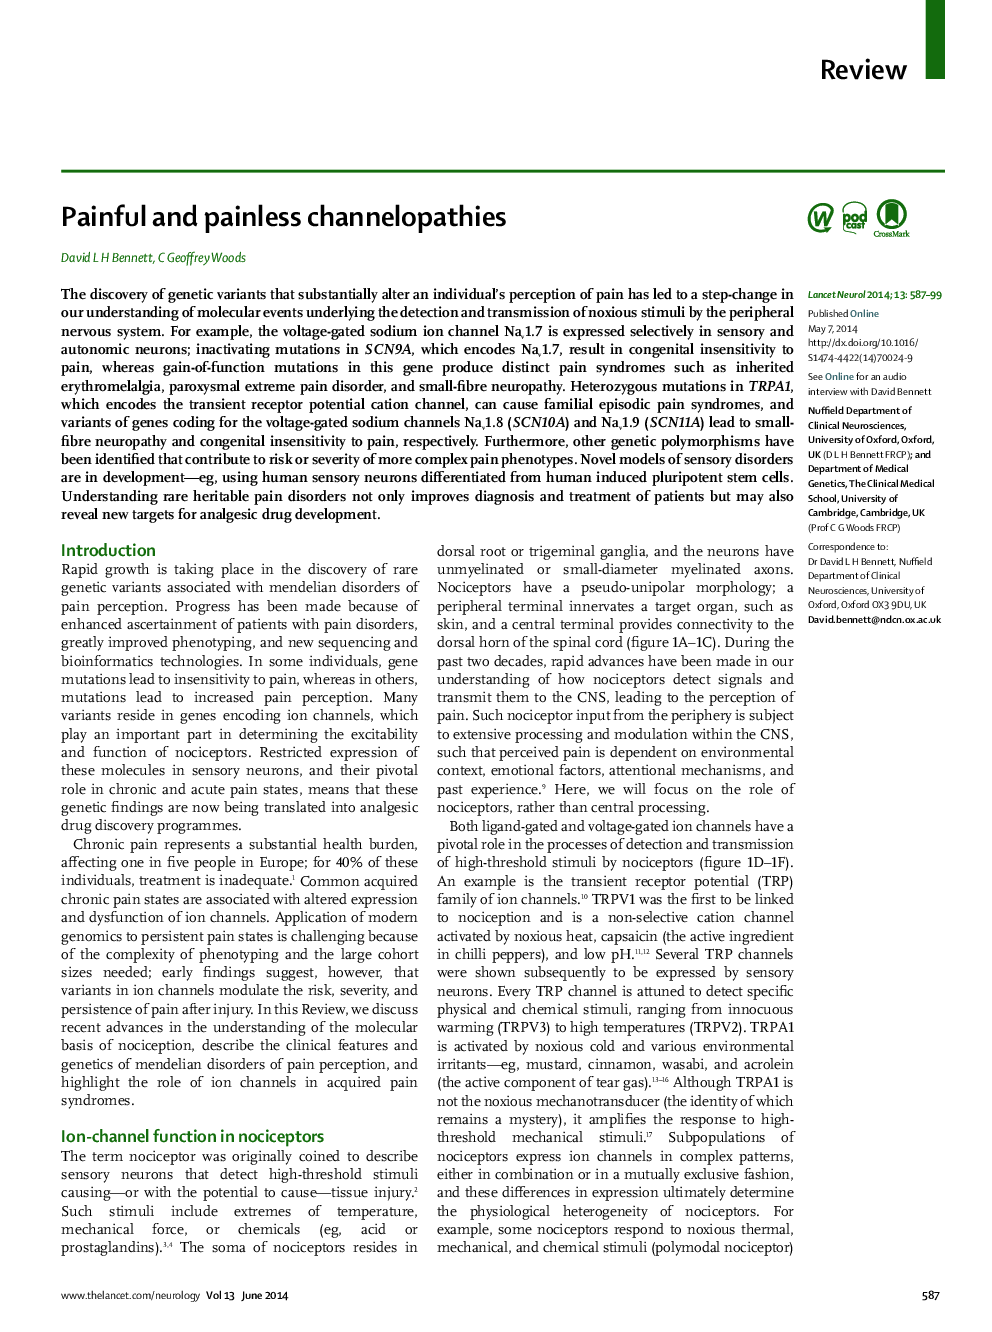 Painful and painless channelopathies